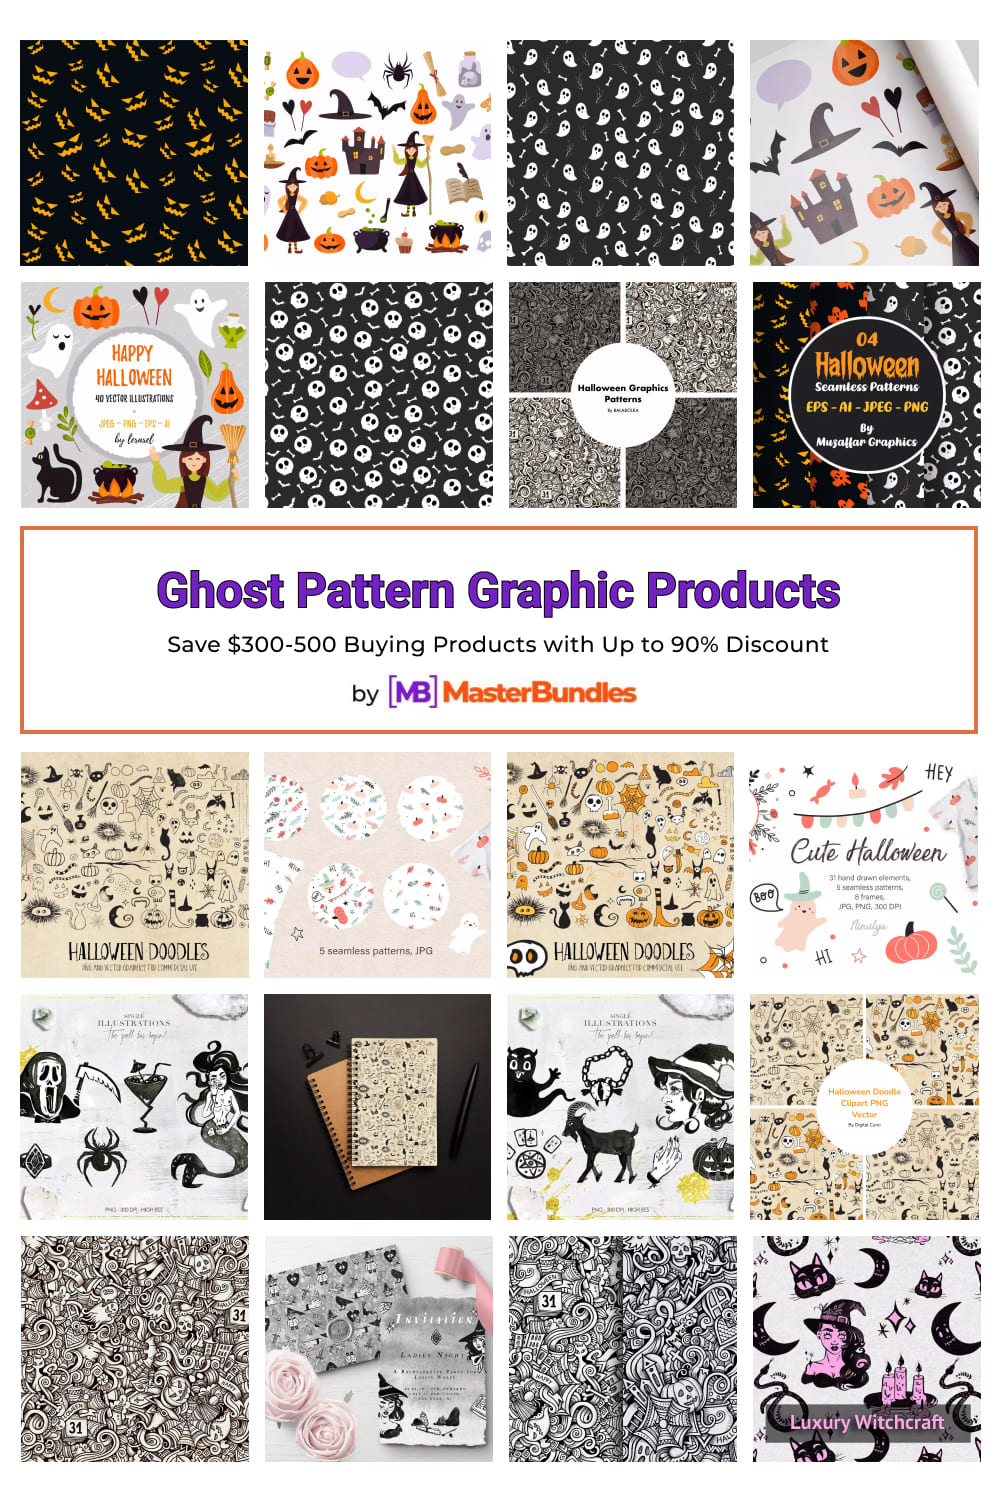 Ghost Pattern Graphic Products for Pinterest.